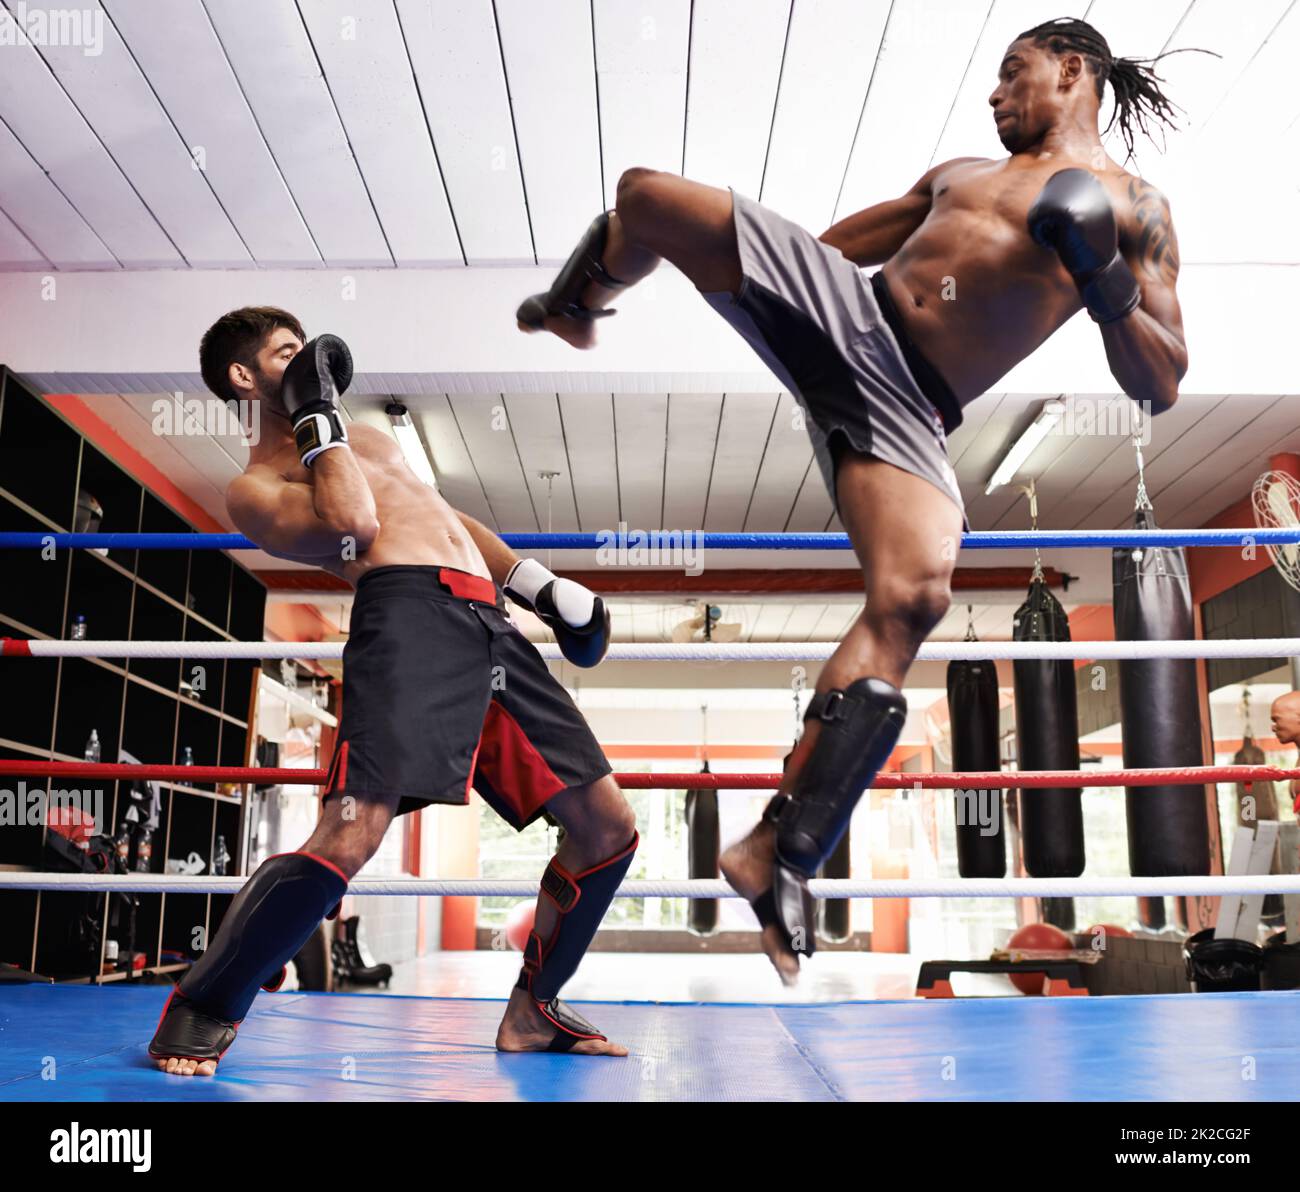 Two kickboxers in training. Stock Photo